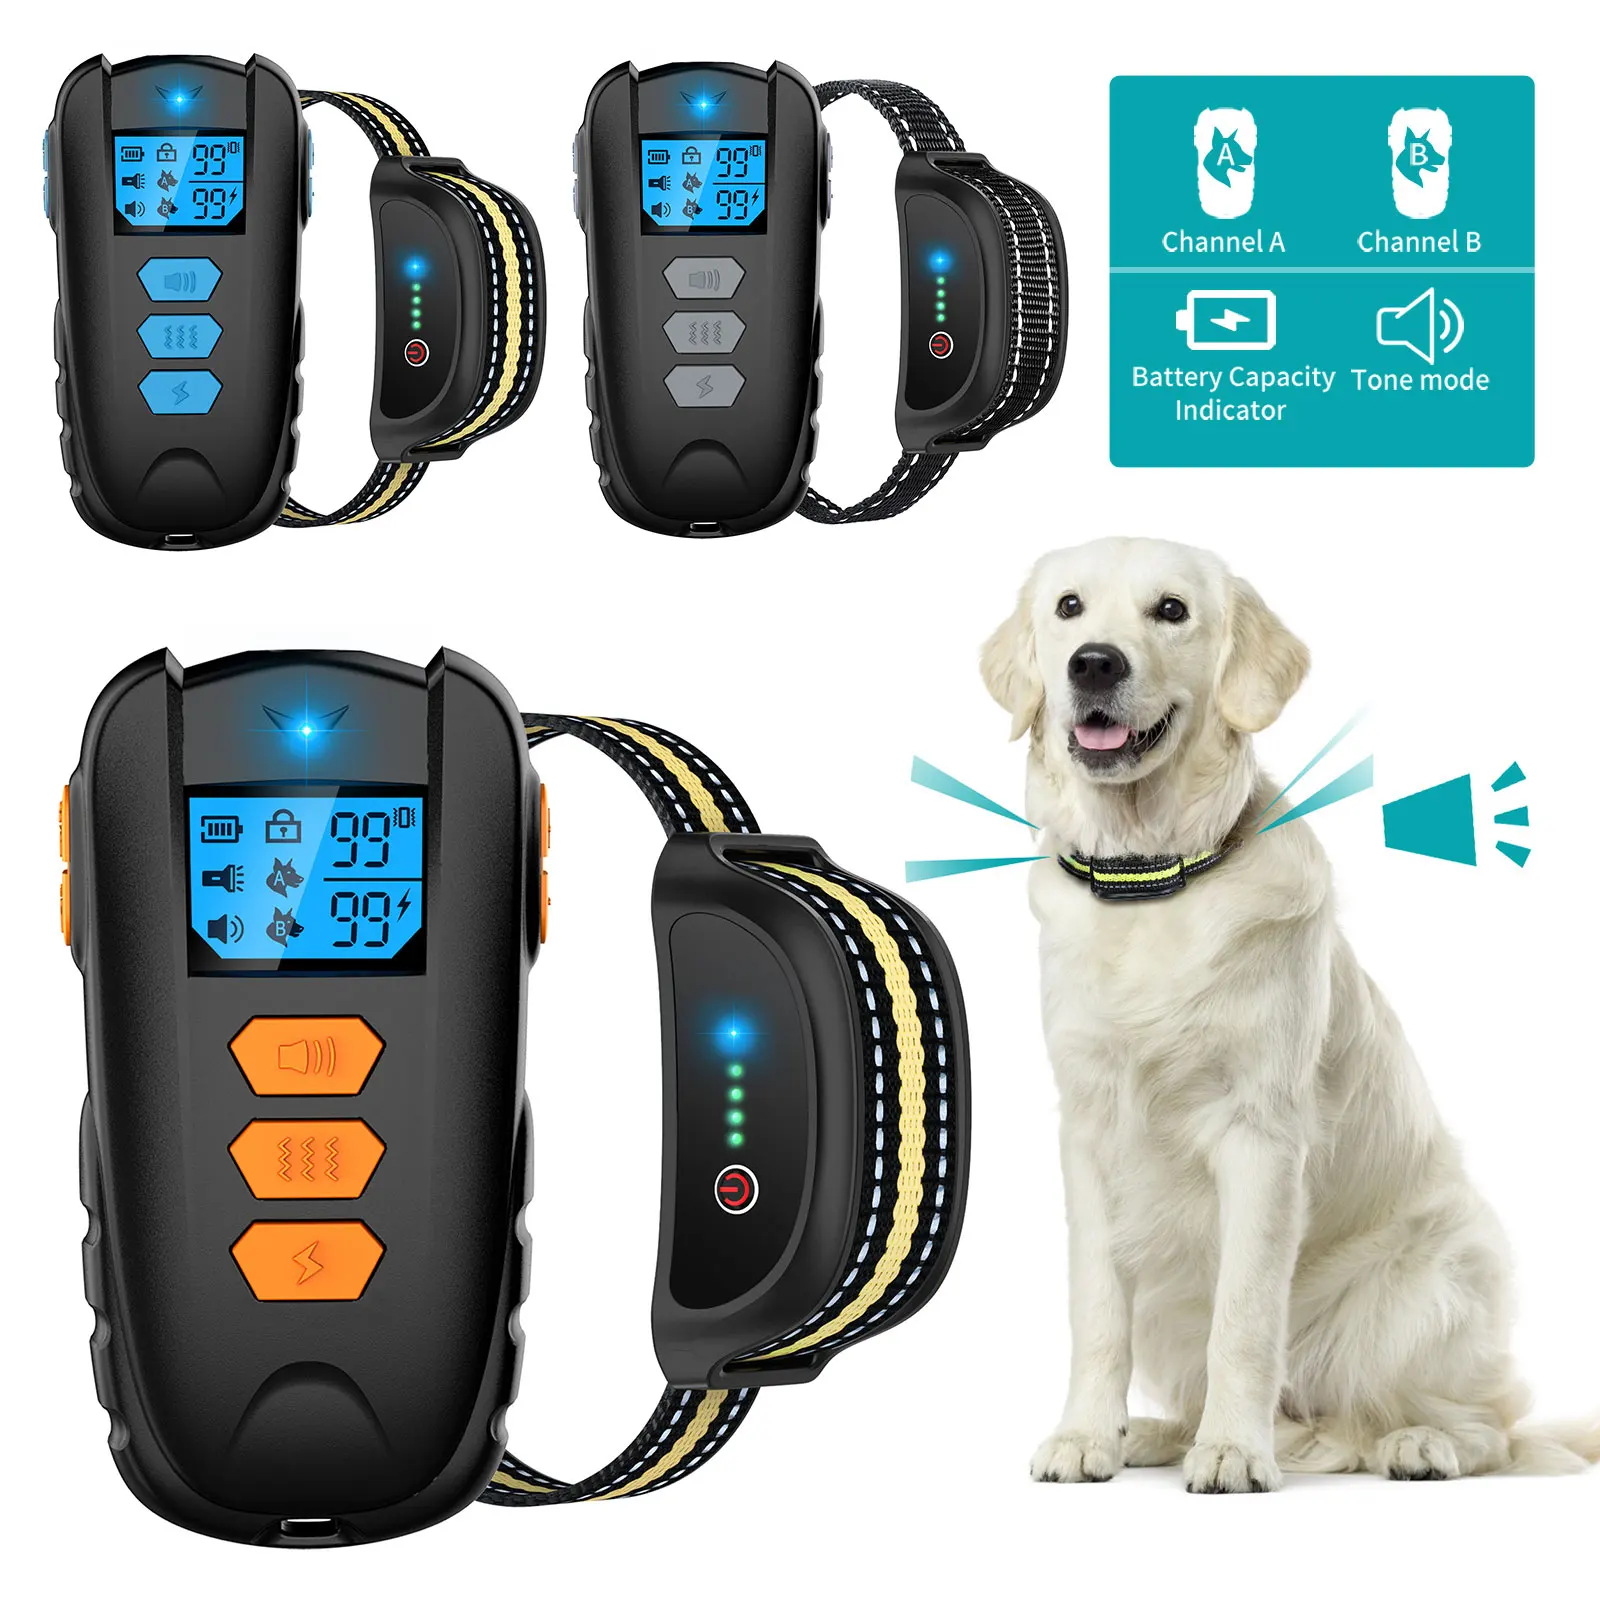 

Sound Remote Vibration Dogs Collar Pet 1000ft Electric Control Dog For Training Shock Barkproof Waterproof Collars Rechargeable